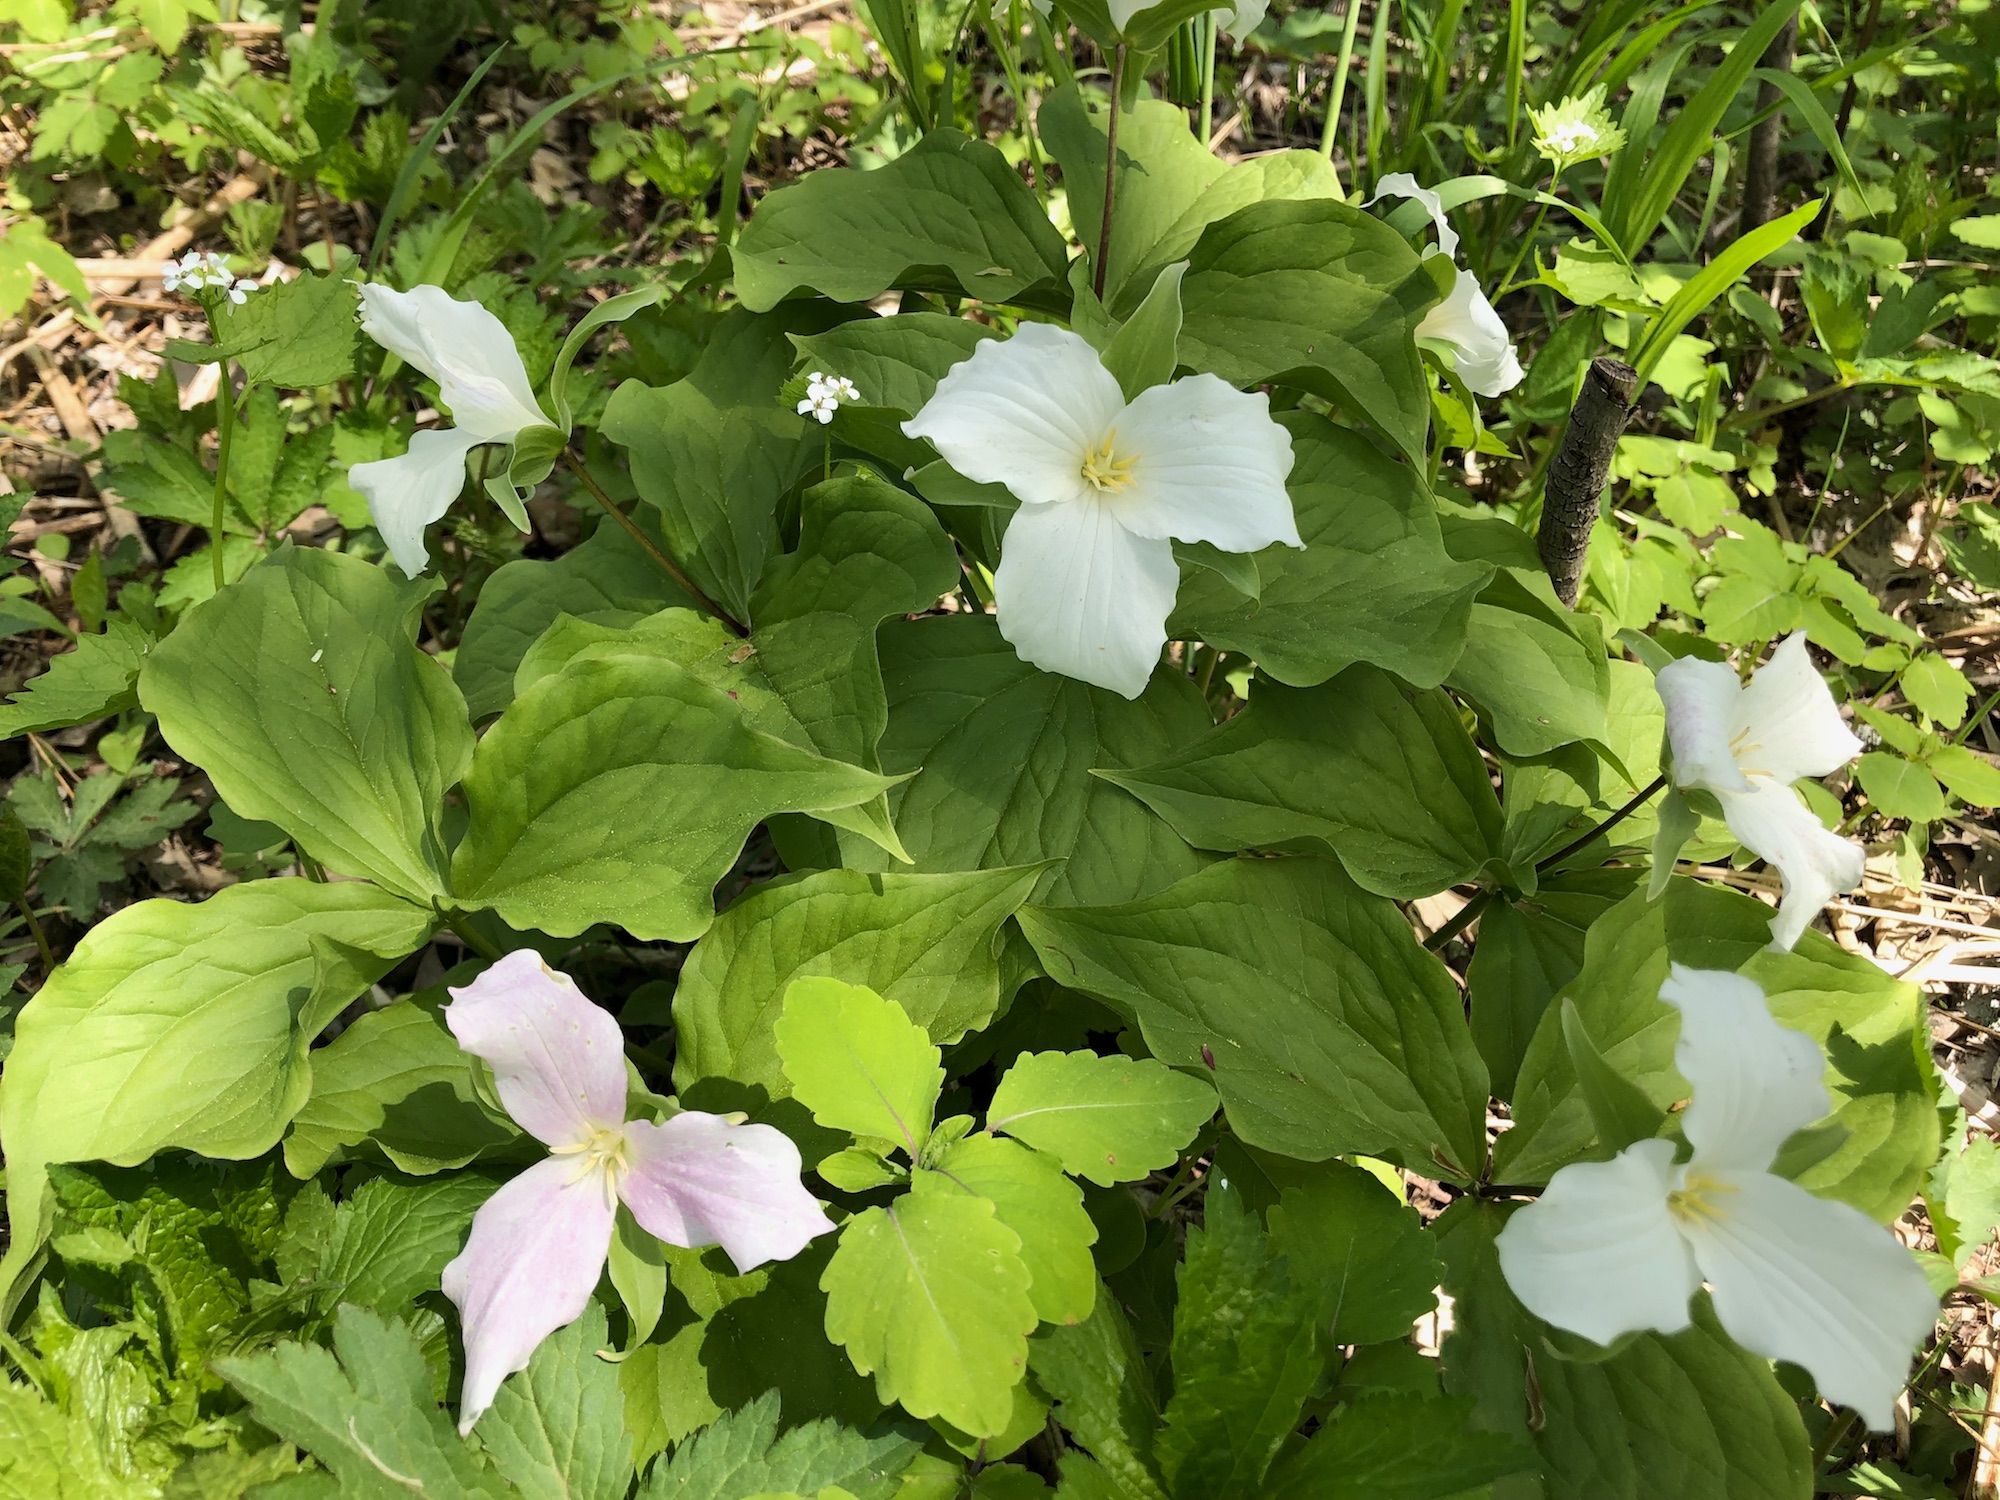 Great White Trillium on hill near Council Ring on May 15, 2019.